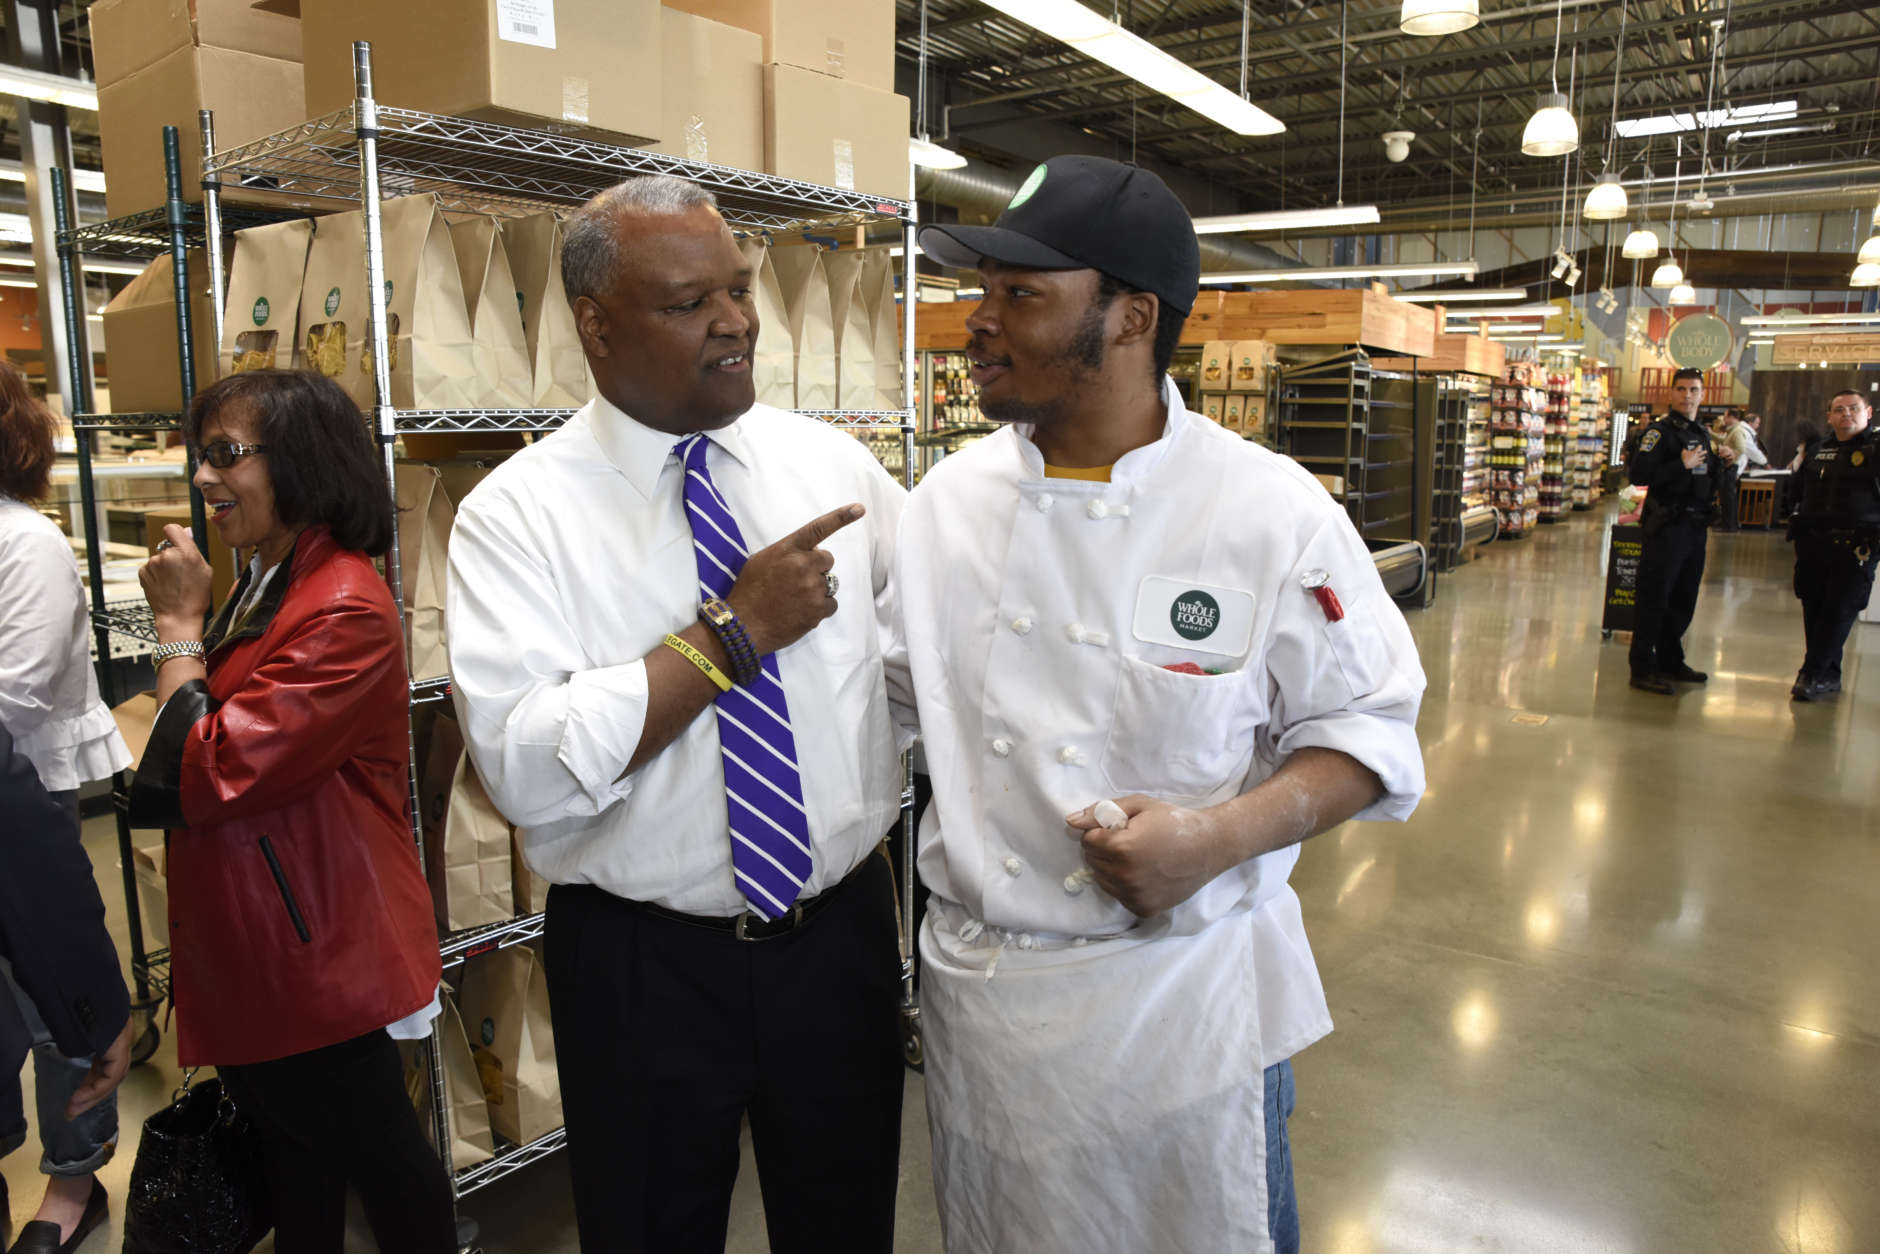 On Sunday's soft opening, County Executive Rushern Baker meets Timothy Alexander, the Whole Foods Riverdale Pizza Guy. (Courtesy Mike Yourishin)